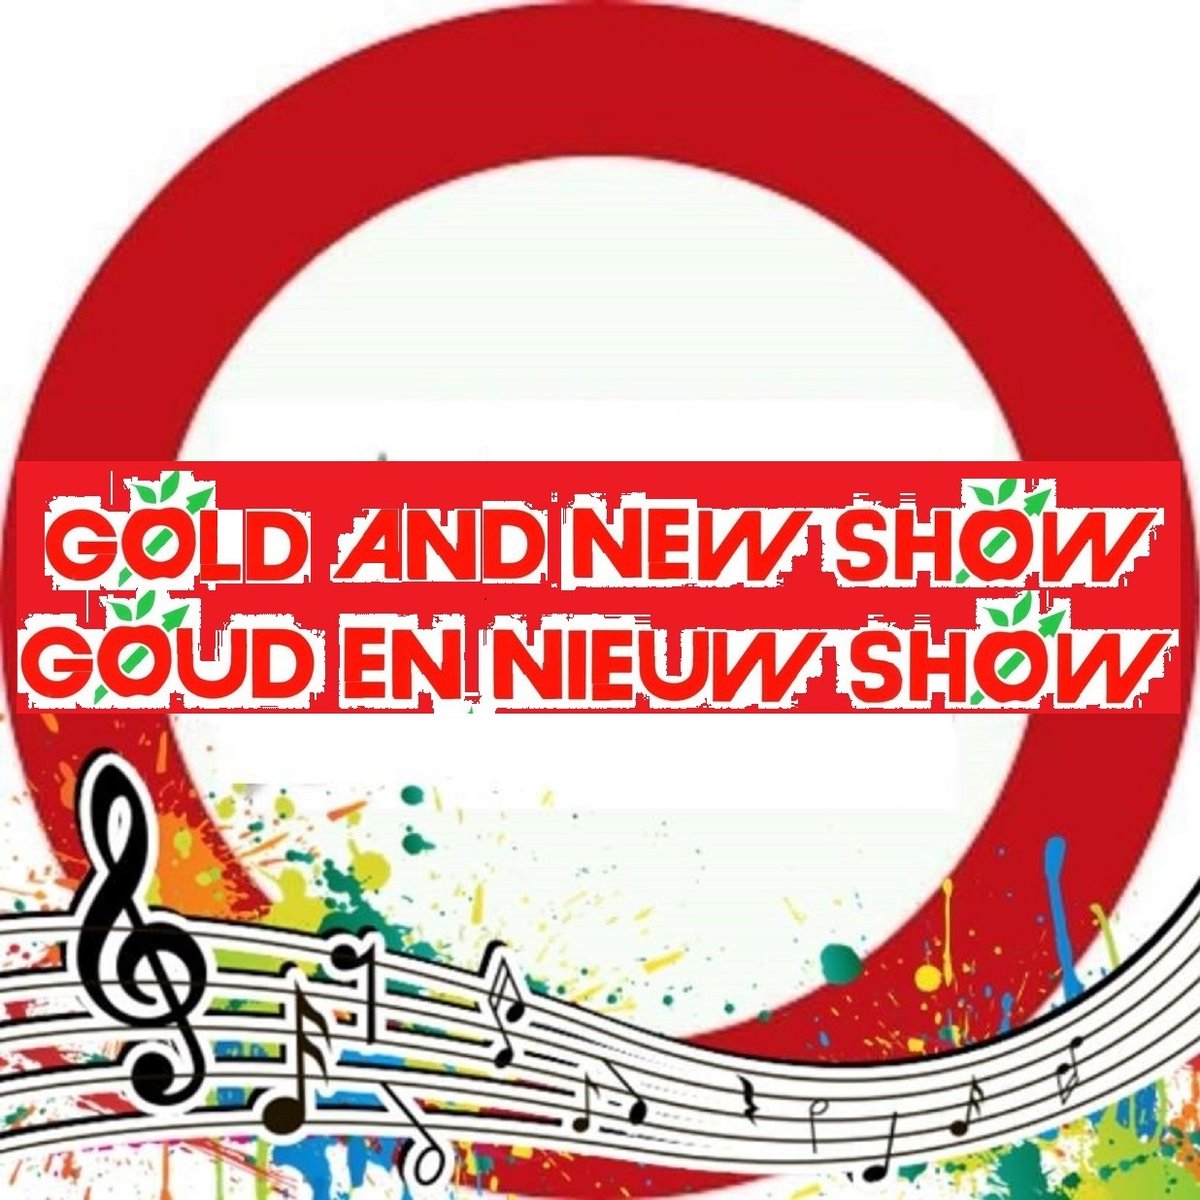 RADIOOCTAAFAMSTERDAM.nl
vimm.tv/c/octaafradio
twitch.tv/radiooctaaf
GOUD EN NIEUW SHOW (#GoldenOldies and New releases)
The MUSIC and PLAYLIST are on,
Smartradio/TV
(Sunday 3pm cet Zondagmiddag 3 uur)
#Newmusicfriday
#RADIO #AMSTERDAM #RadioOctaaf